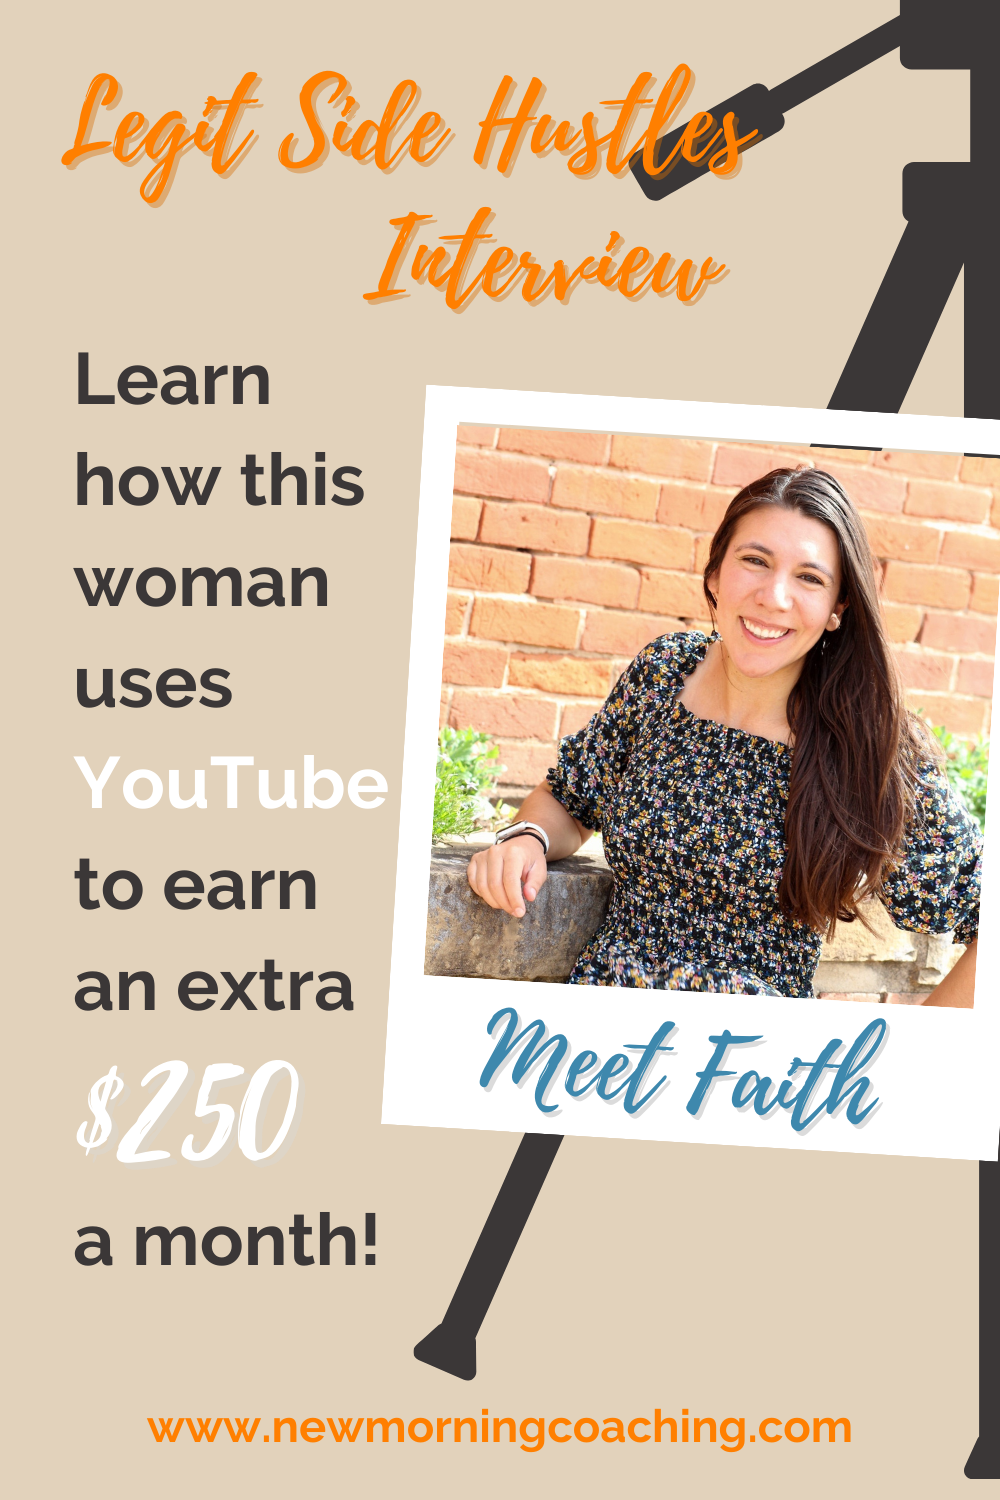 Legit side hustle interview: learn how this woman uses youtube to earn an extra $250 per month